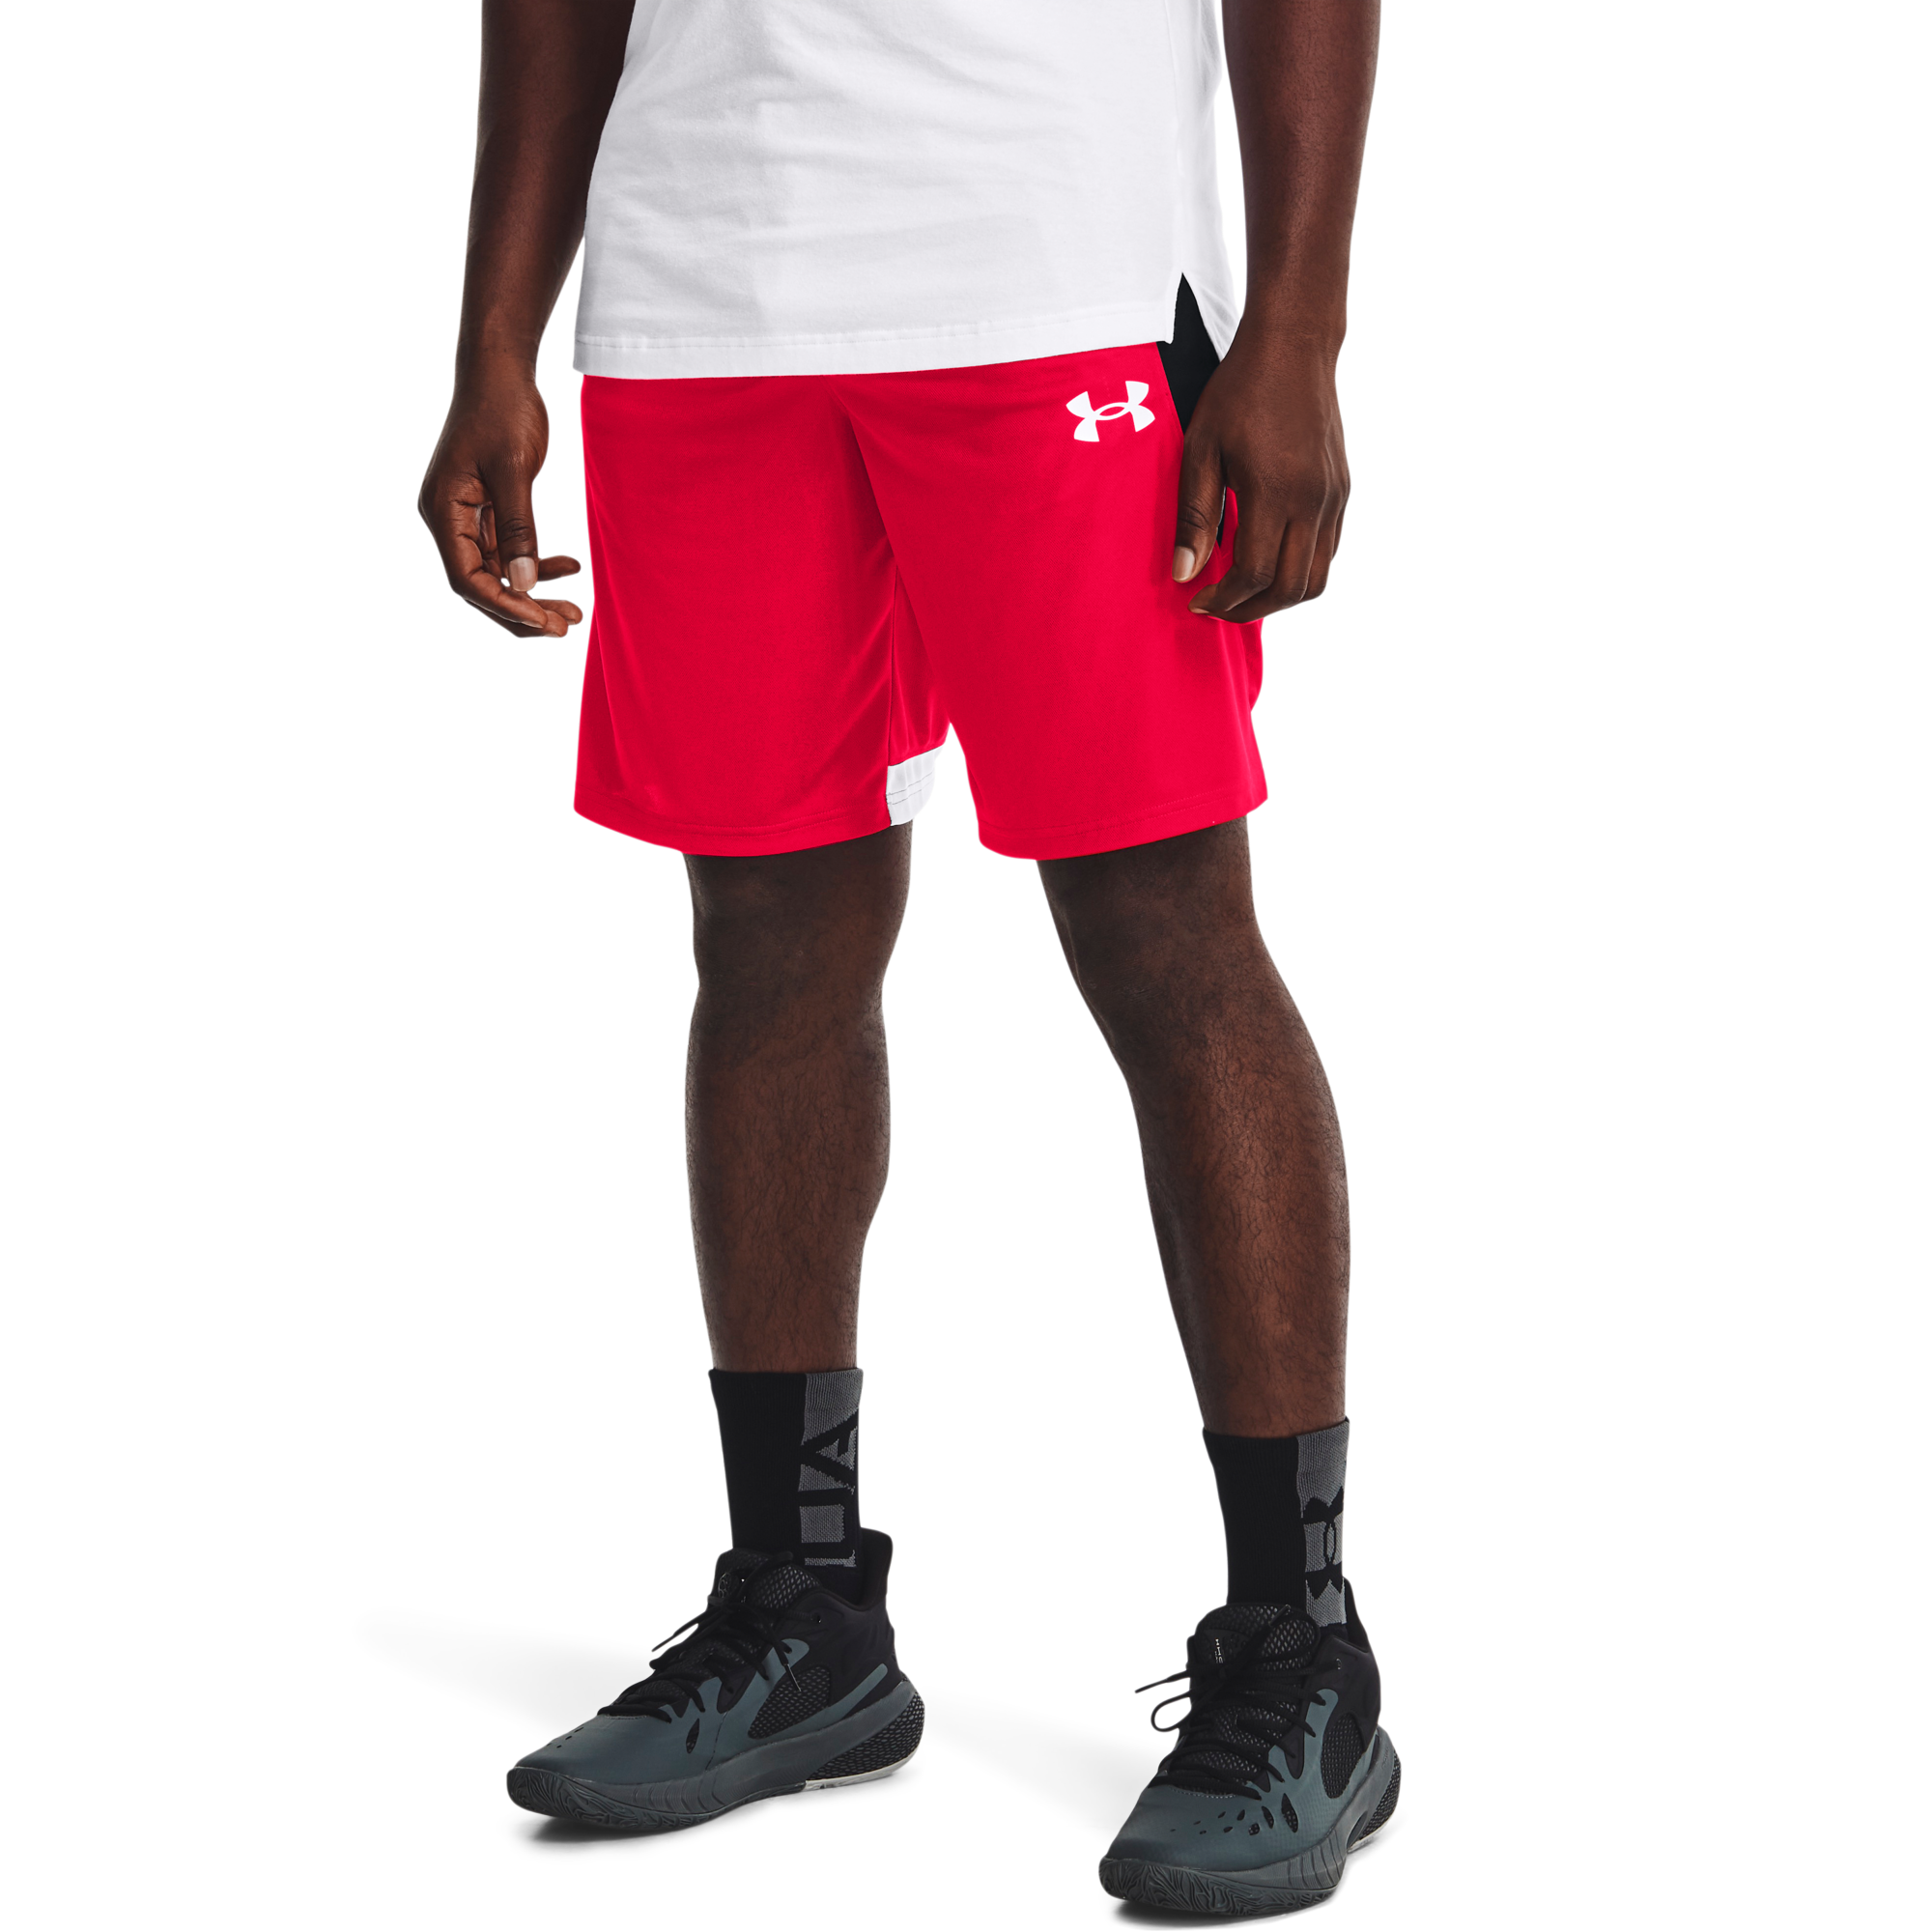 Under Armour Men's Baseline Basketball Shorts 1305729 600 Red White L